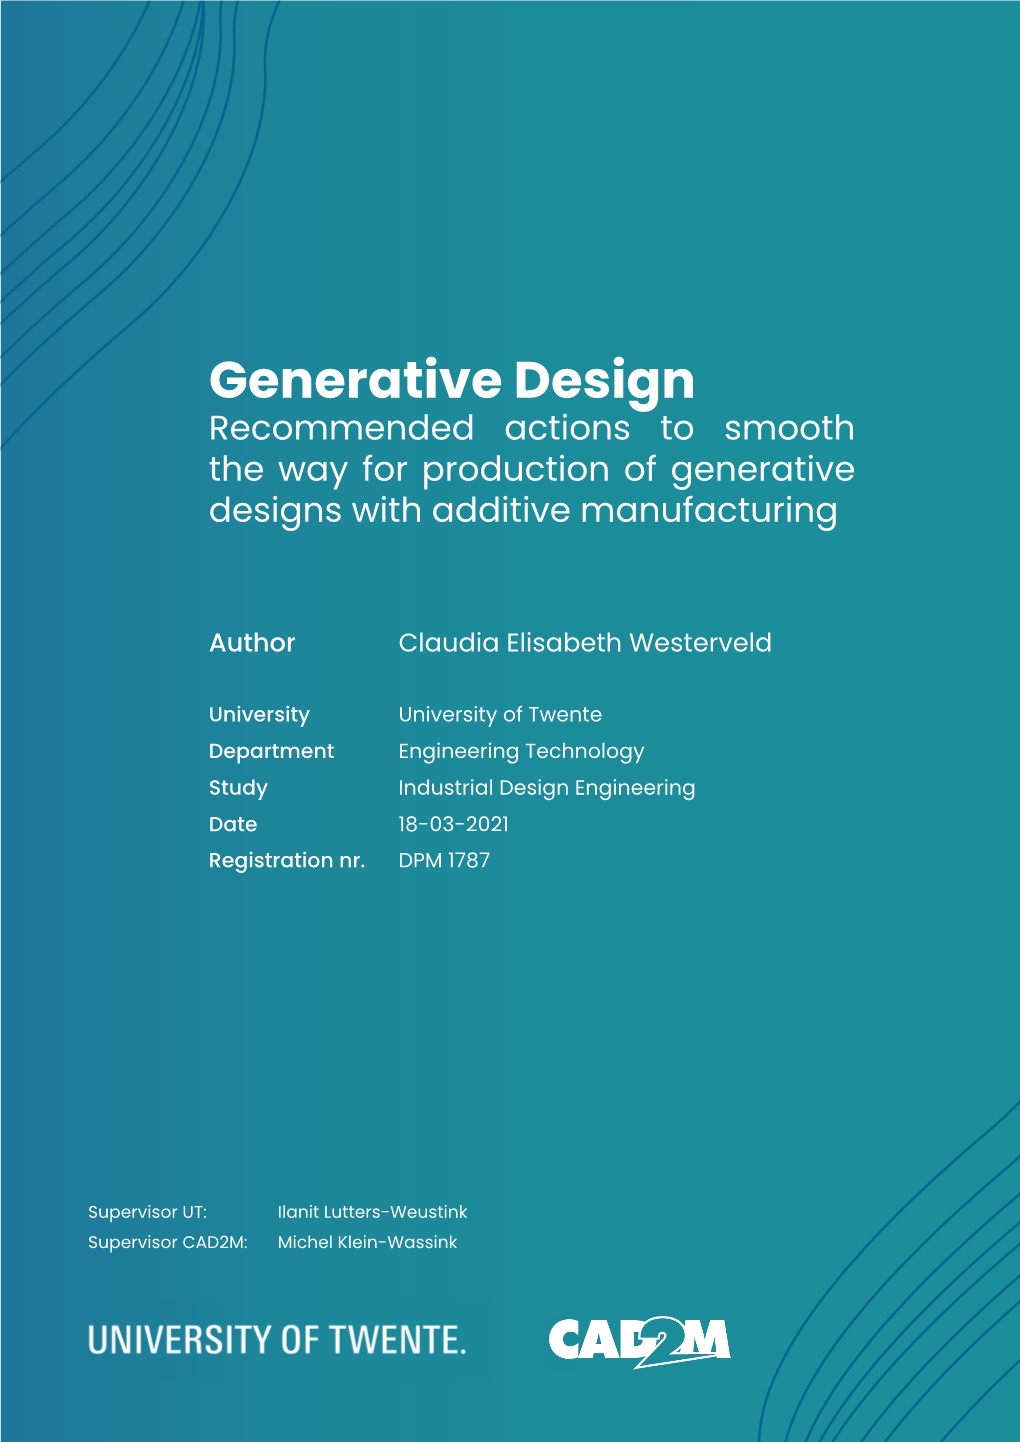 Generative Design Recommended Actions to Smooth the Way for Production of Generative Designs with Additive Manufacturing